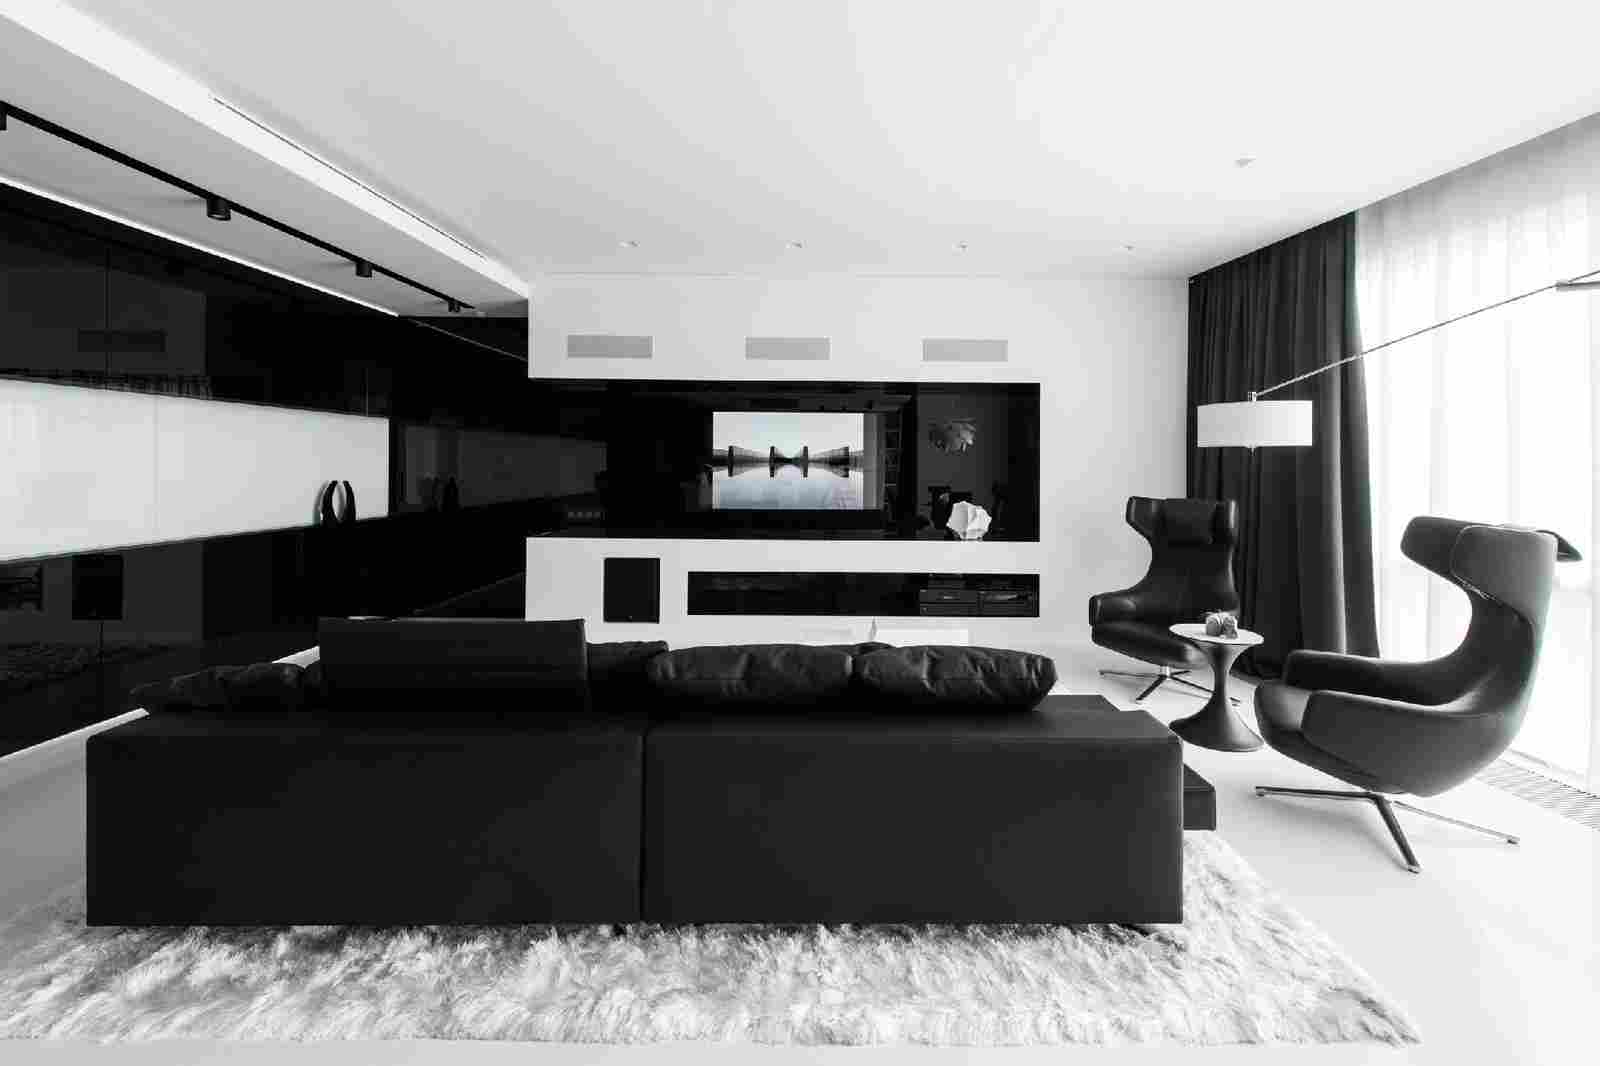 Chic living room decor in black and white